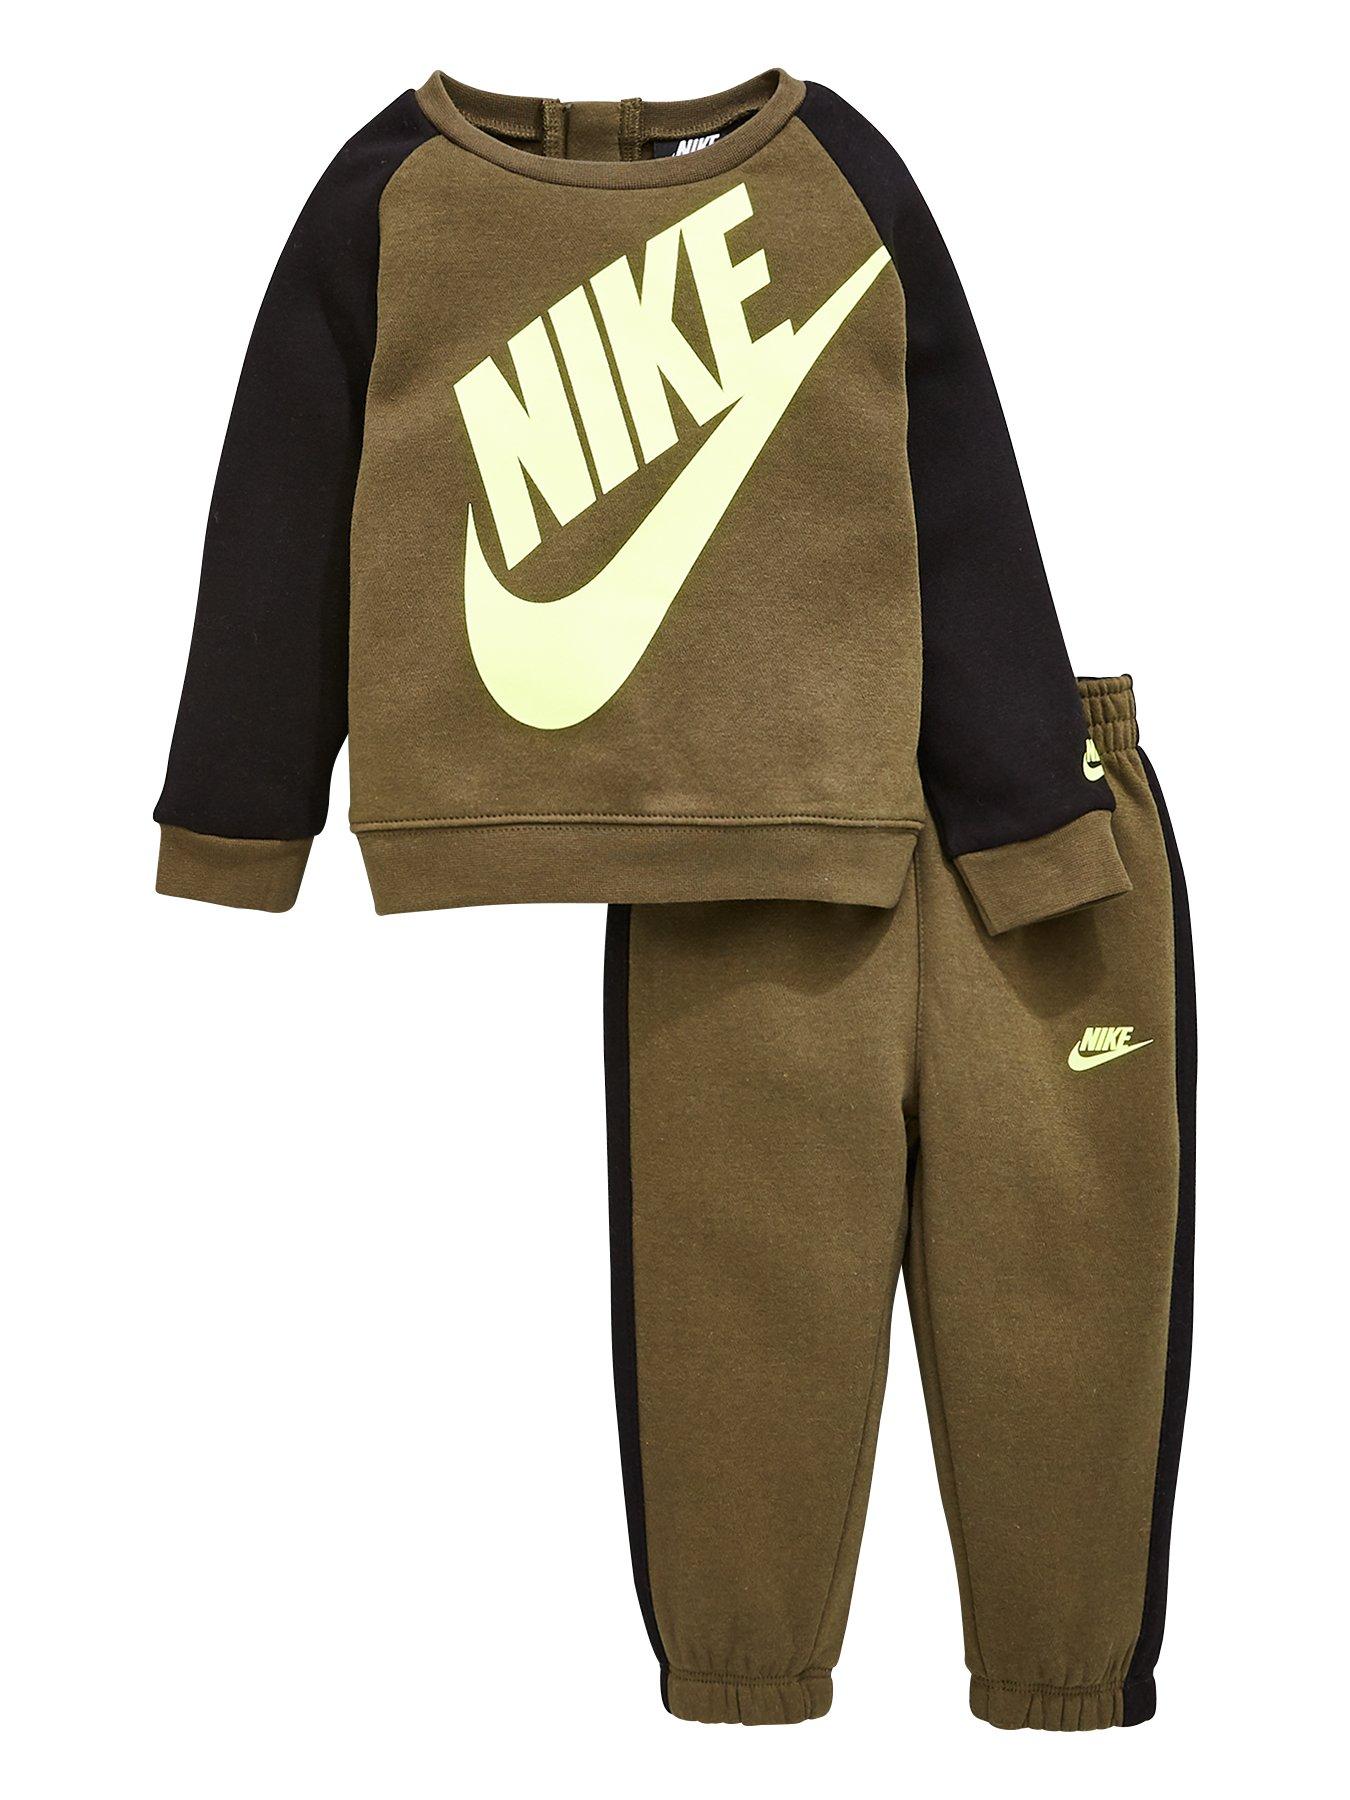 18 month nike outfits boy